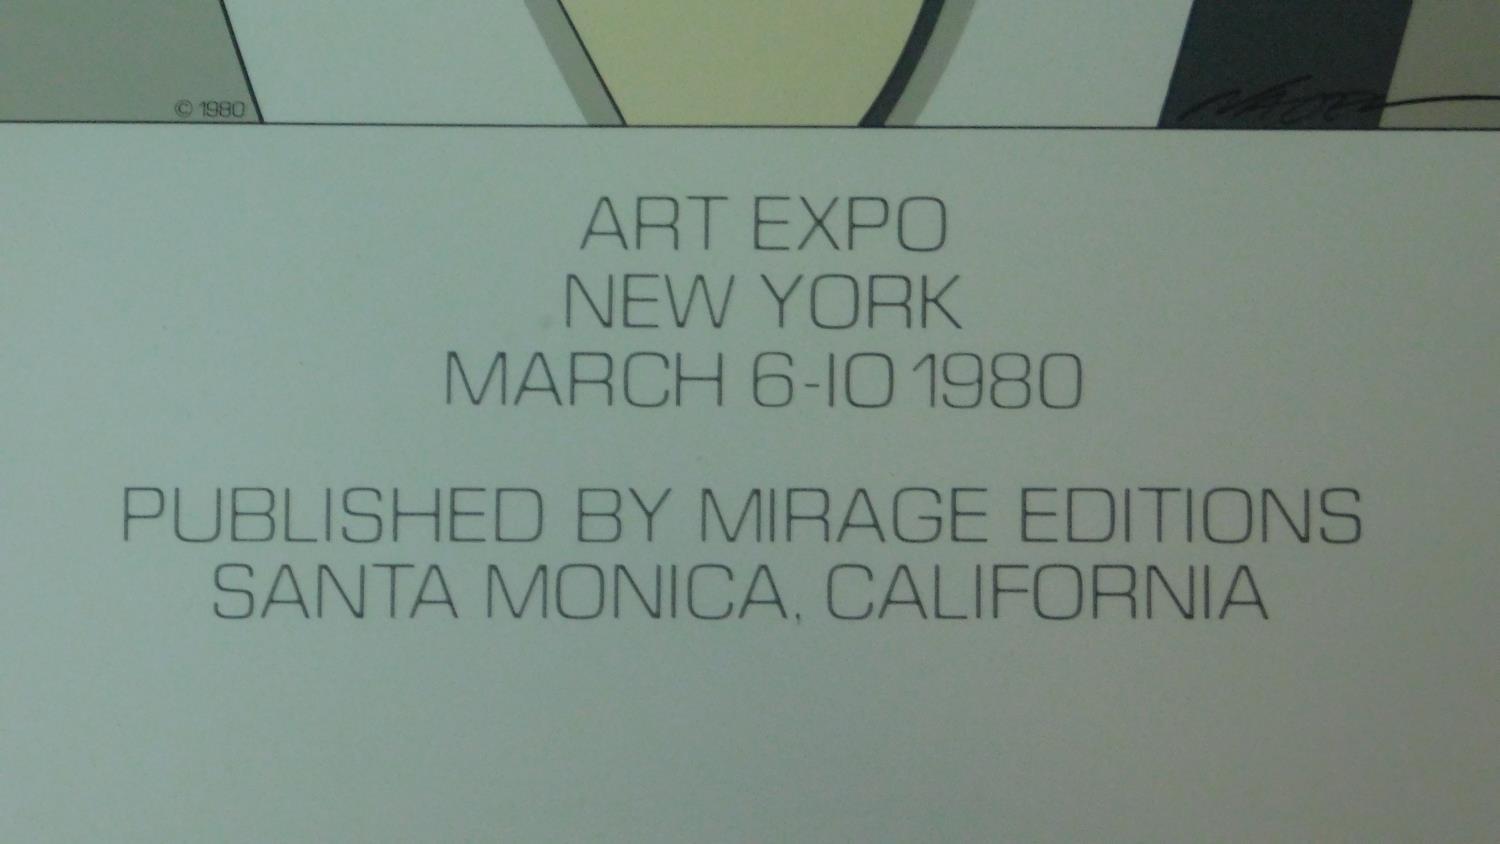 A framed an glazed art expo poster (for Nagel serigraphs exhibition) from New York, March 6-10, - Image 4 of 6